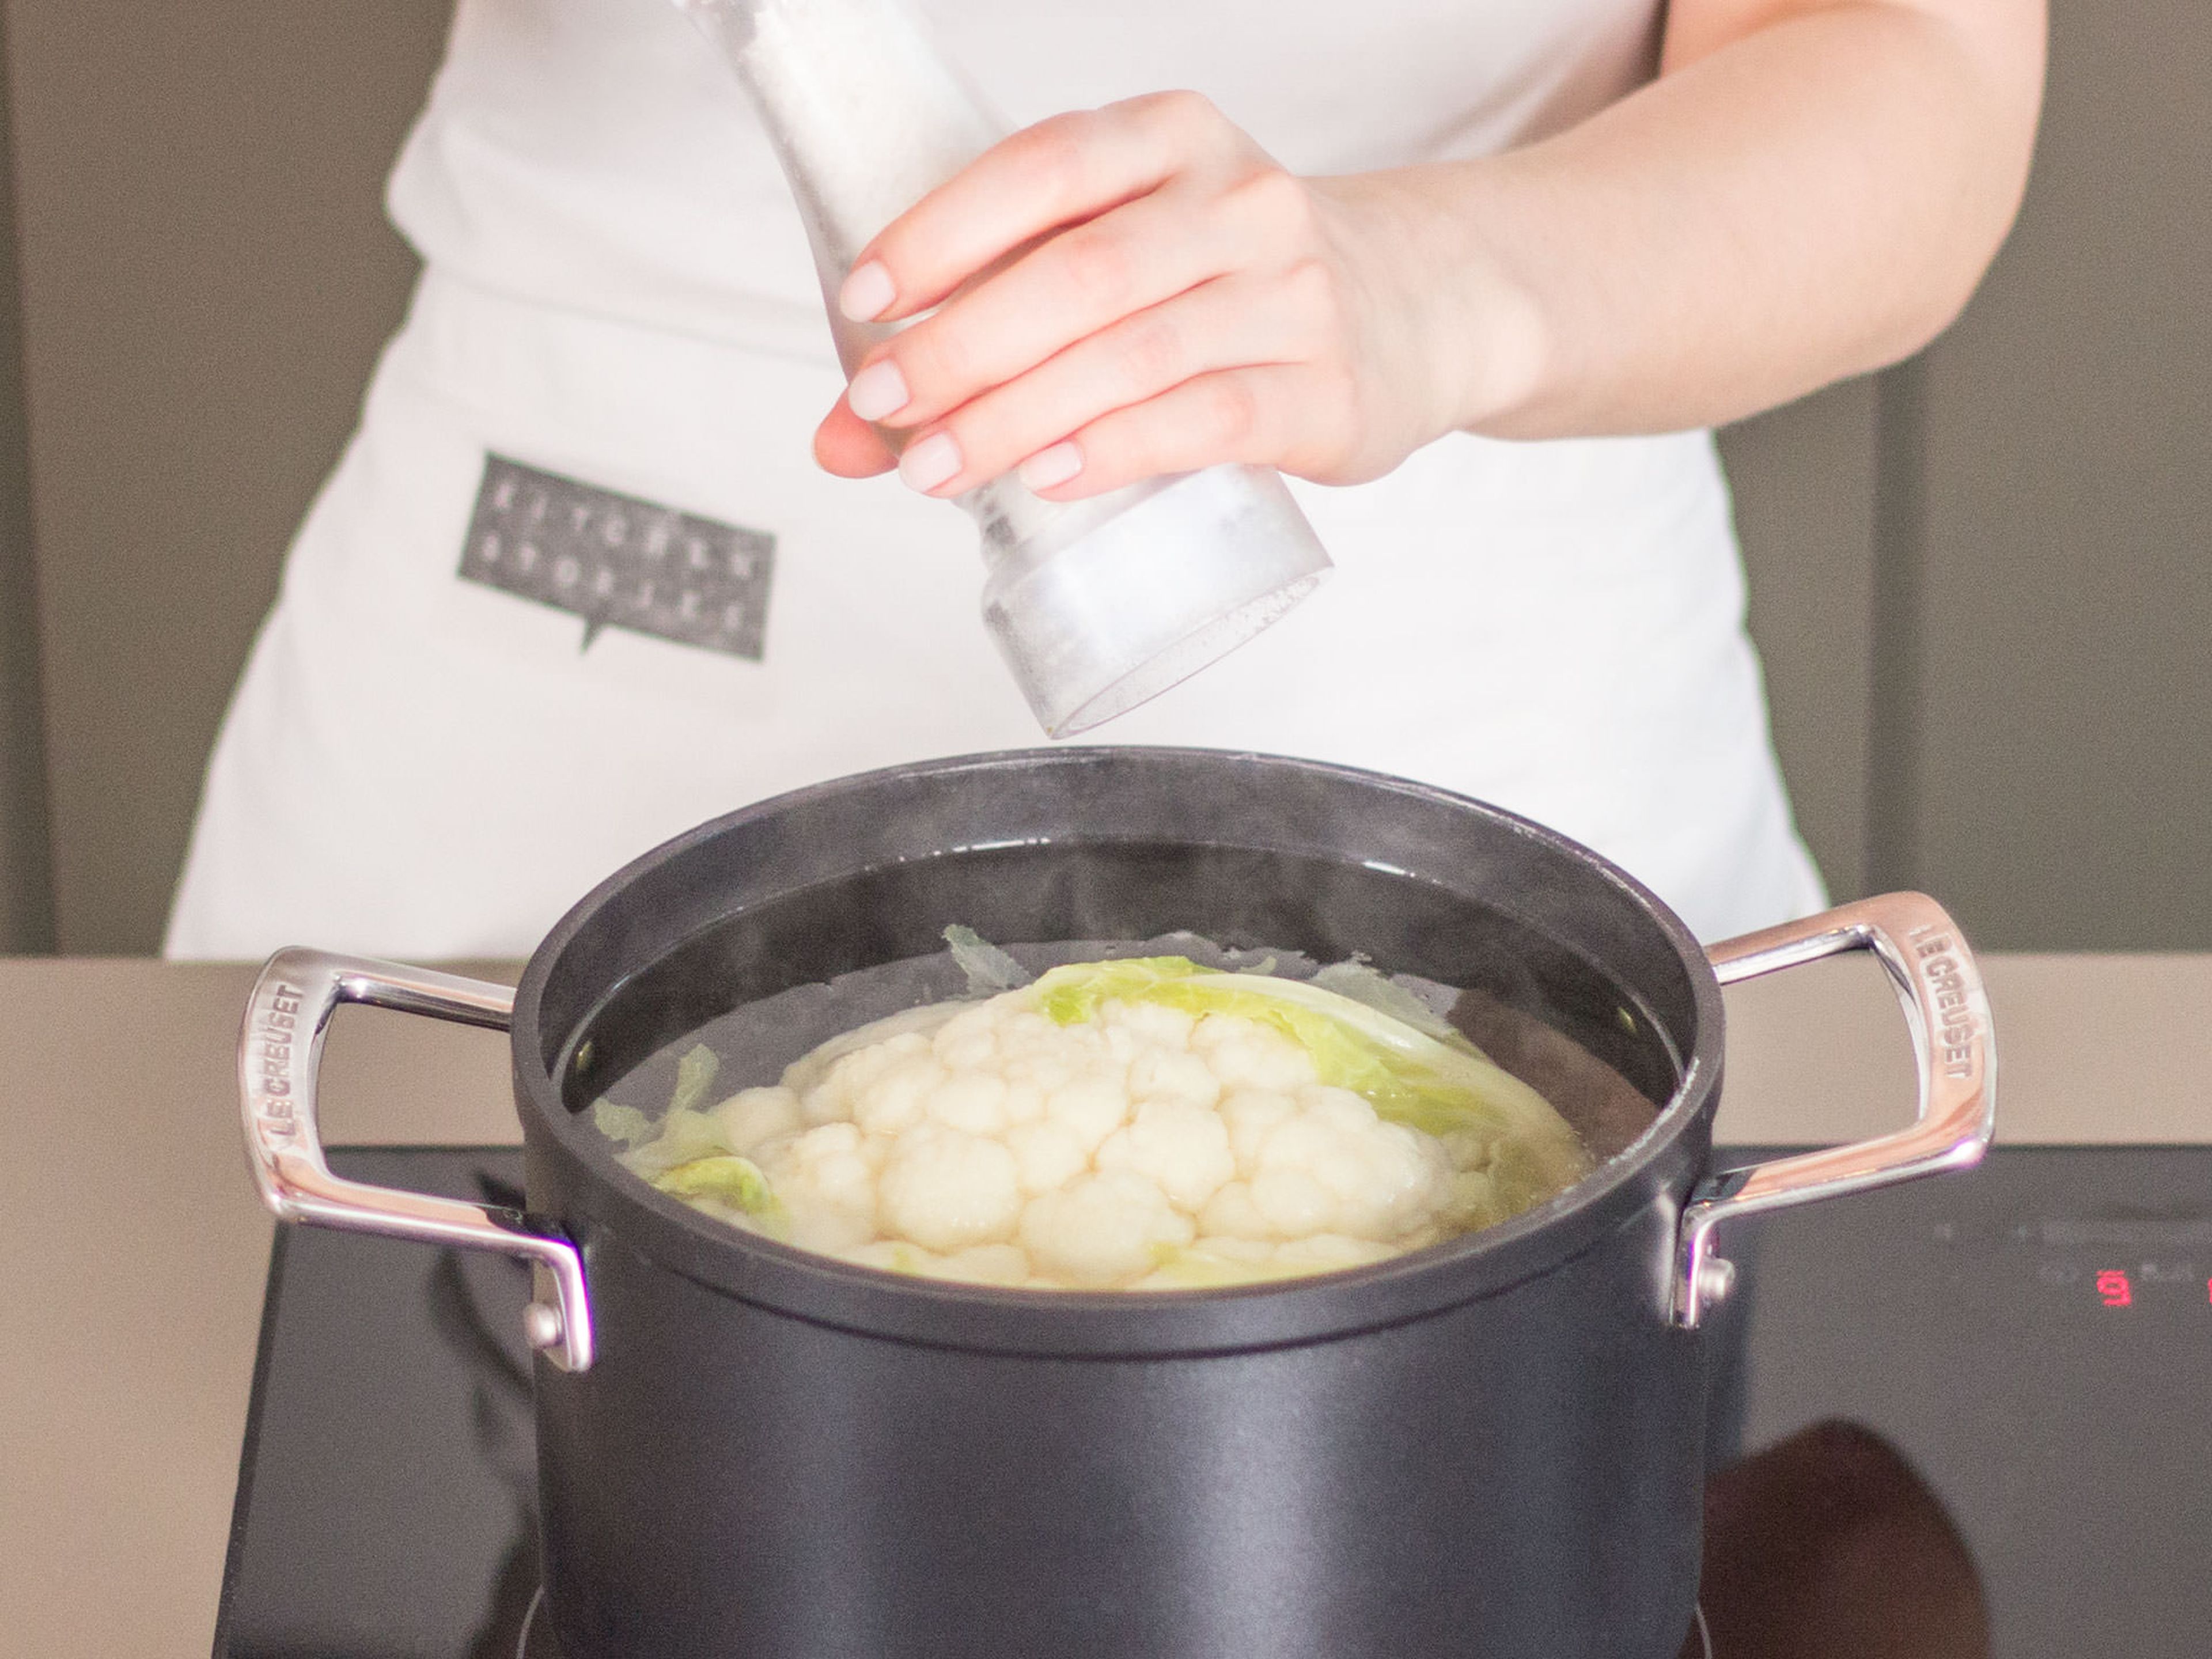 Place cauliflower in a large pot and cover with water. Add a pinch of salt. Bring to a boil and let simmer over medium-high heat for approx. 5 – 10 min.